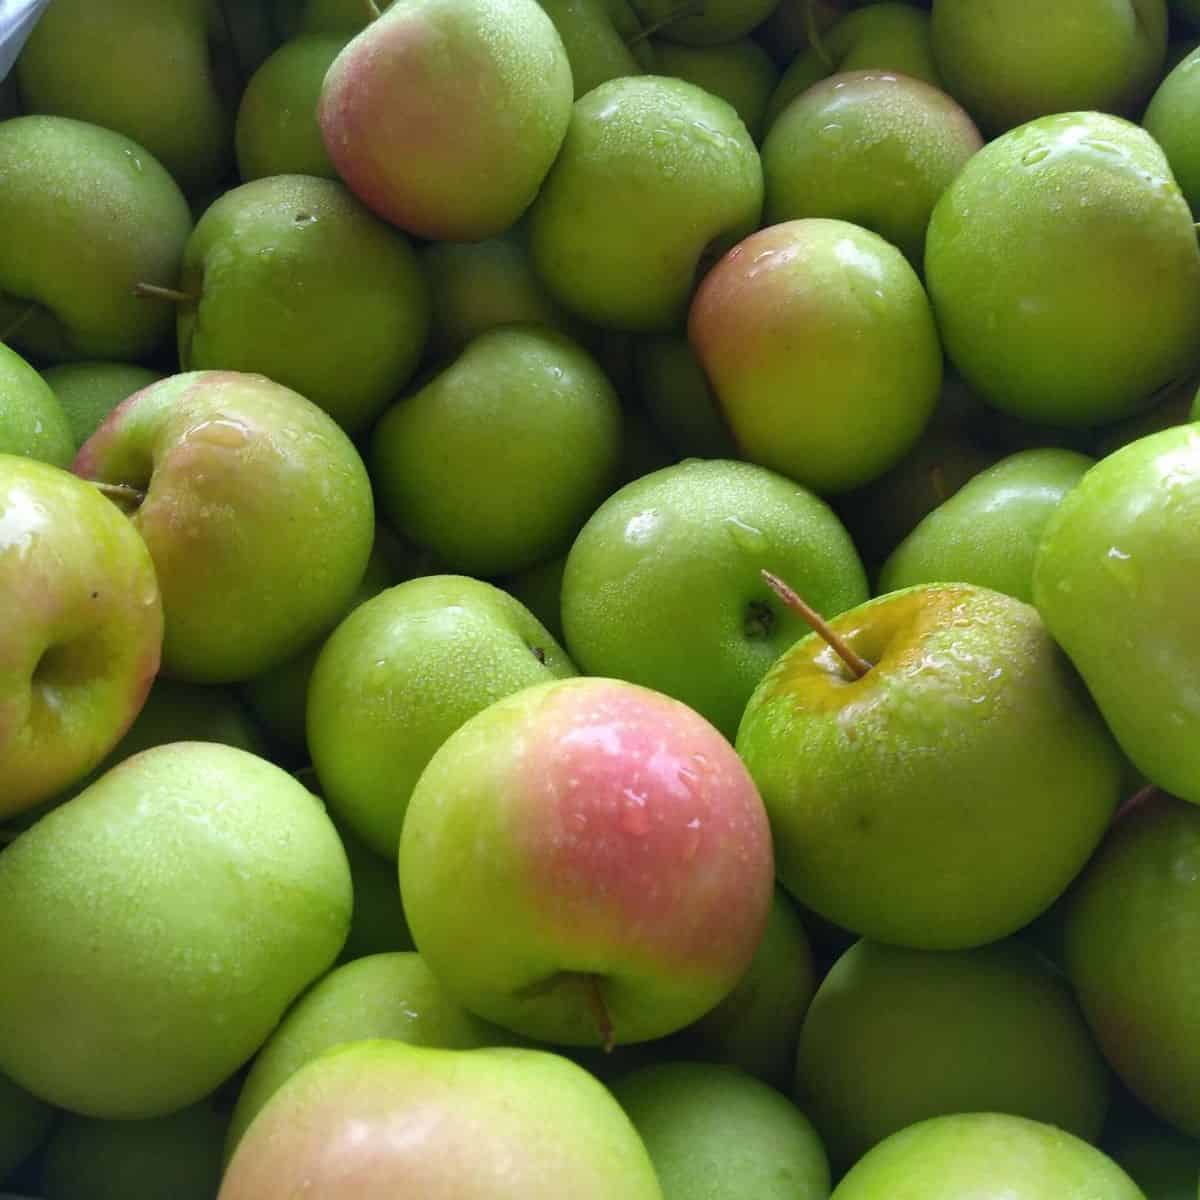 A close up of a bin of green Shamrock apples, some of them with red blush.